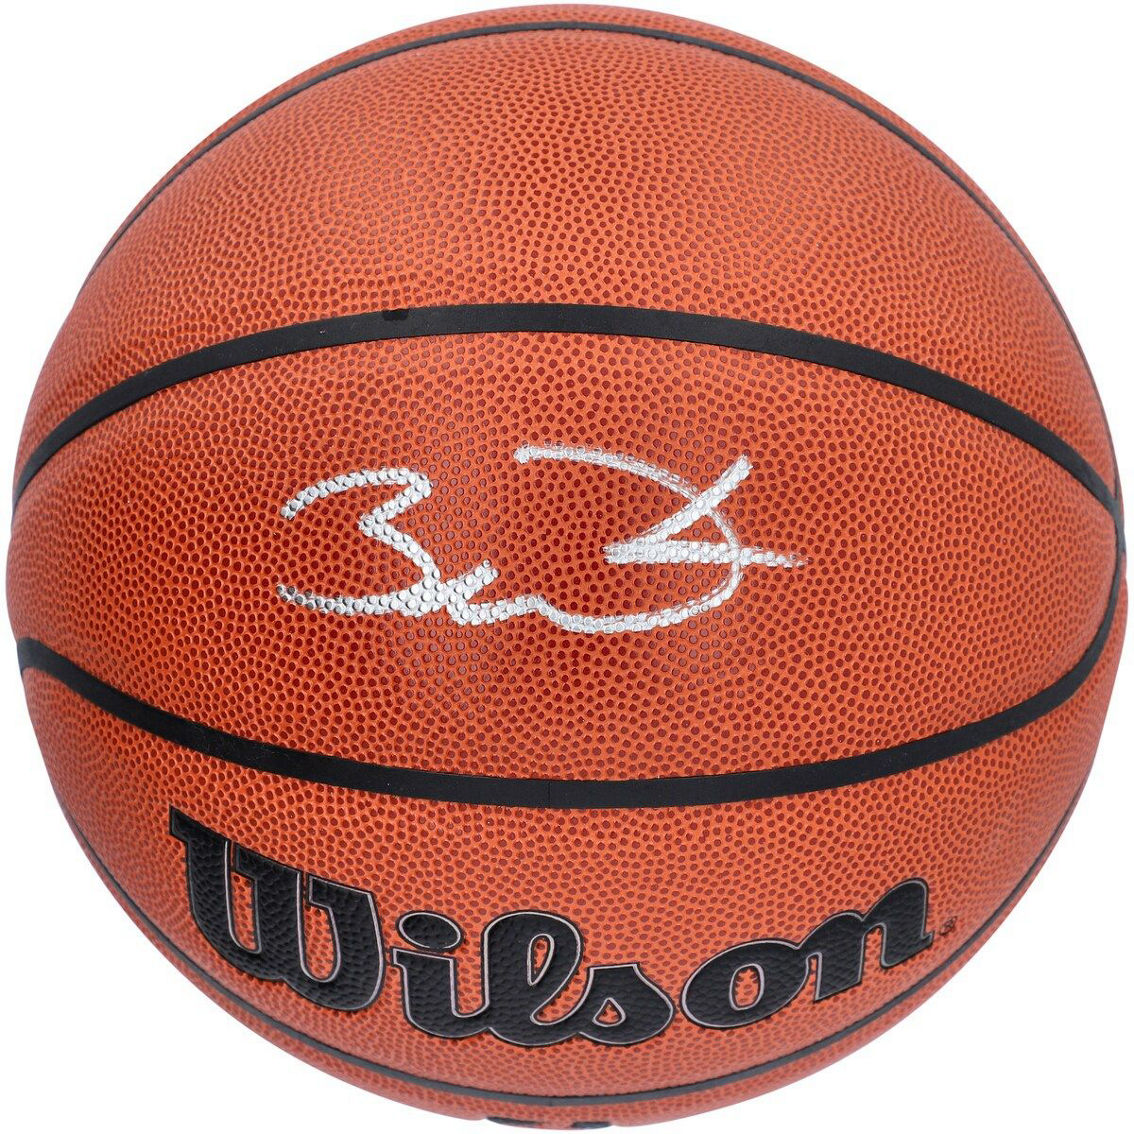 Fanatics Authentic Dwyane Wade Miami Heat Autographed Wilson Authentic Series Indoor/Outdoor Basketball - Image 2 of 3